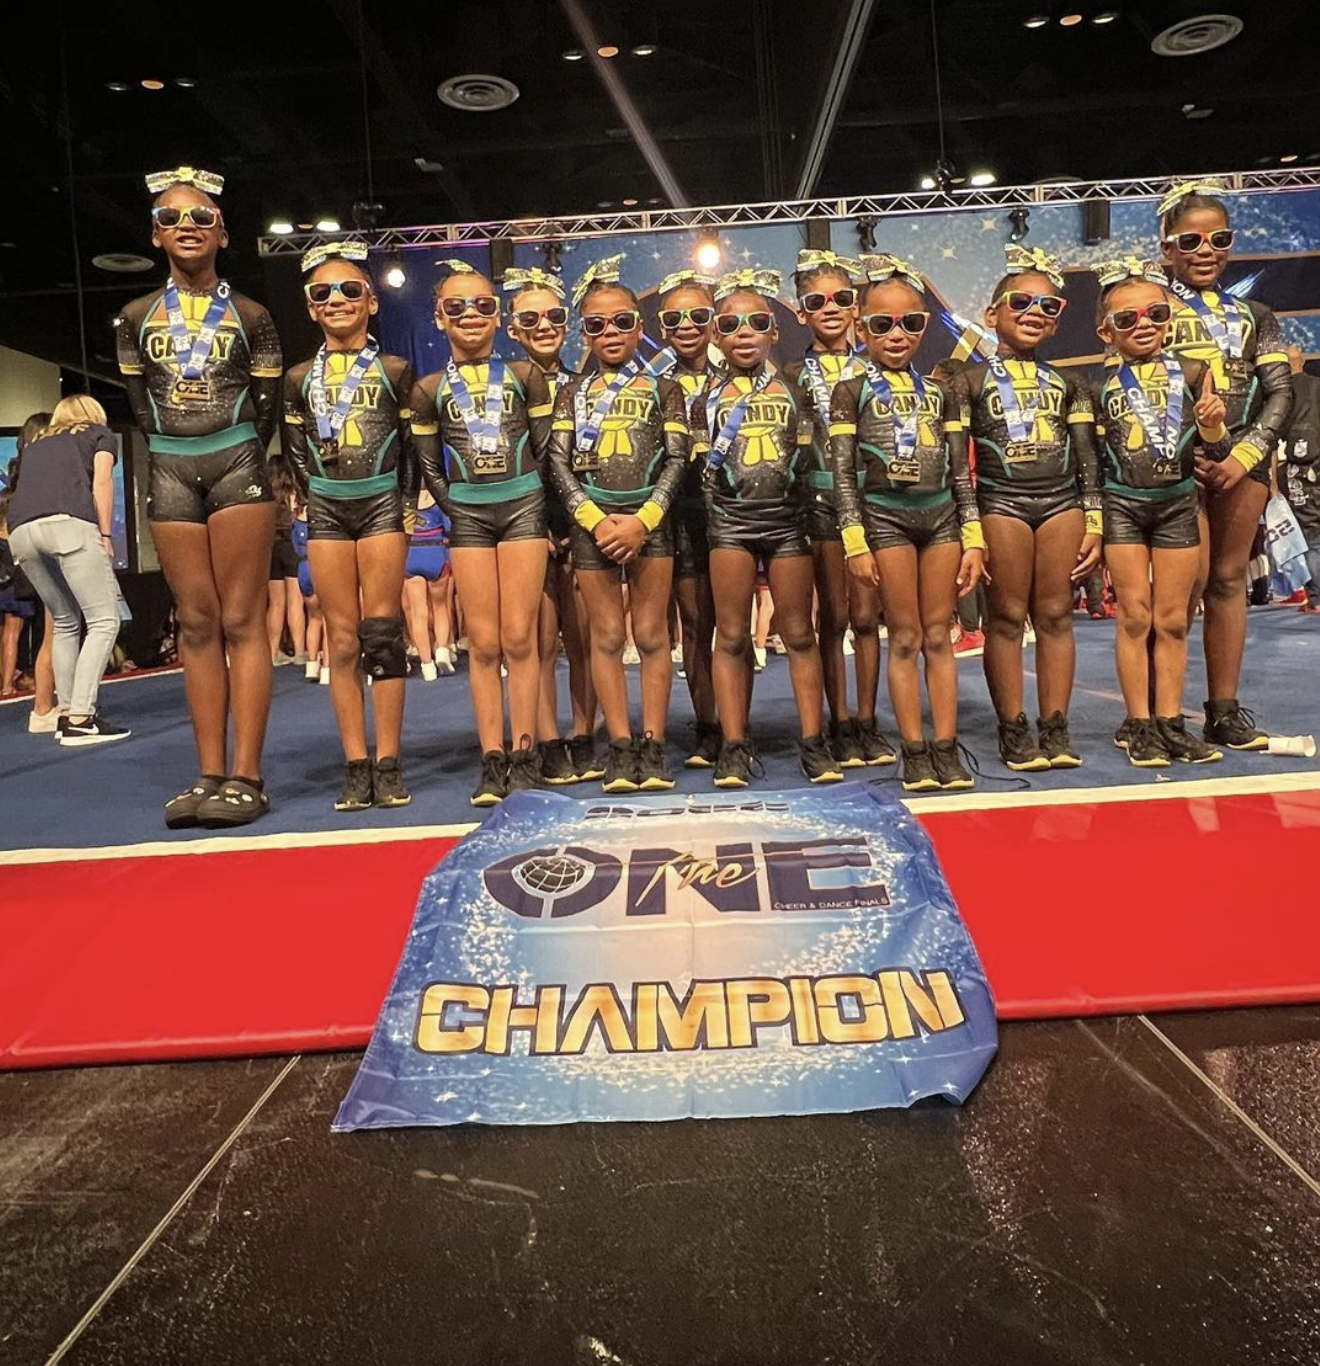 One of Candy Elite All-Stars award-winning teams. Photography from Instagram credit: @candyeliteallstars